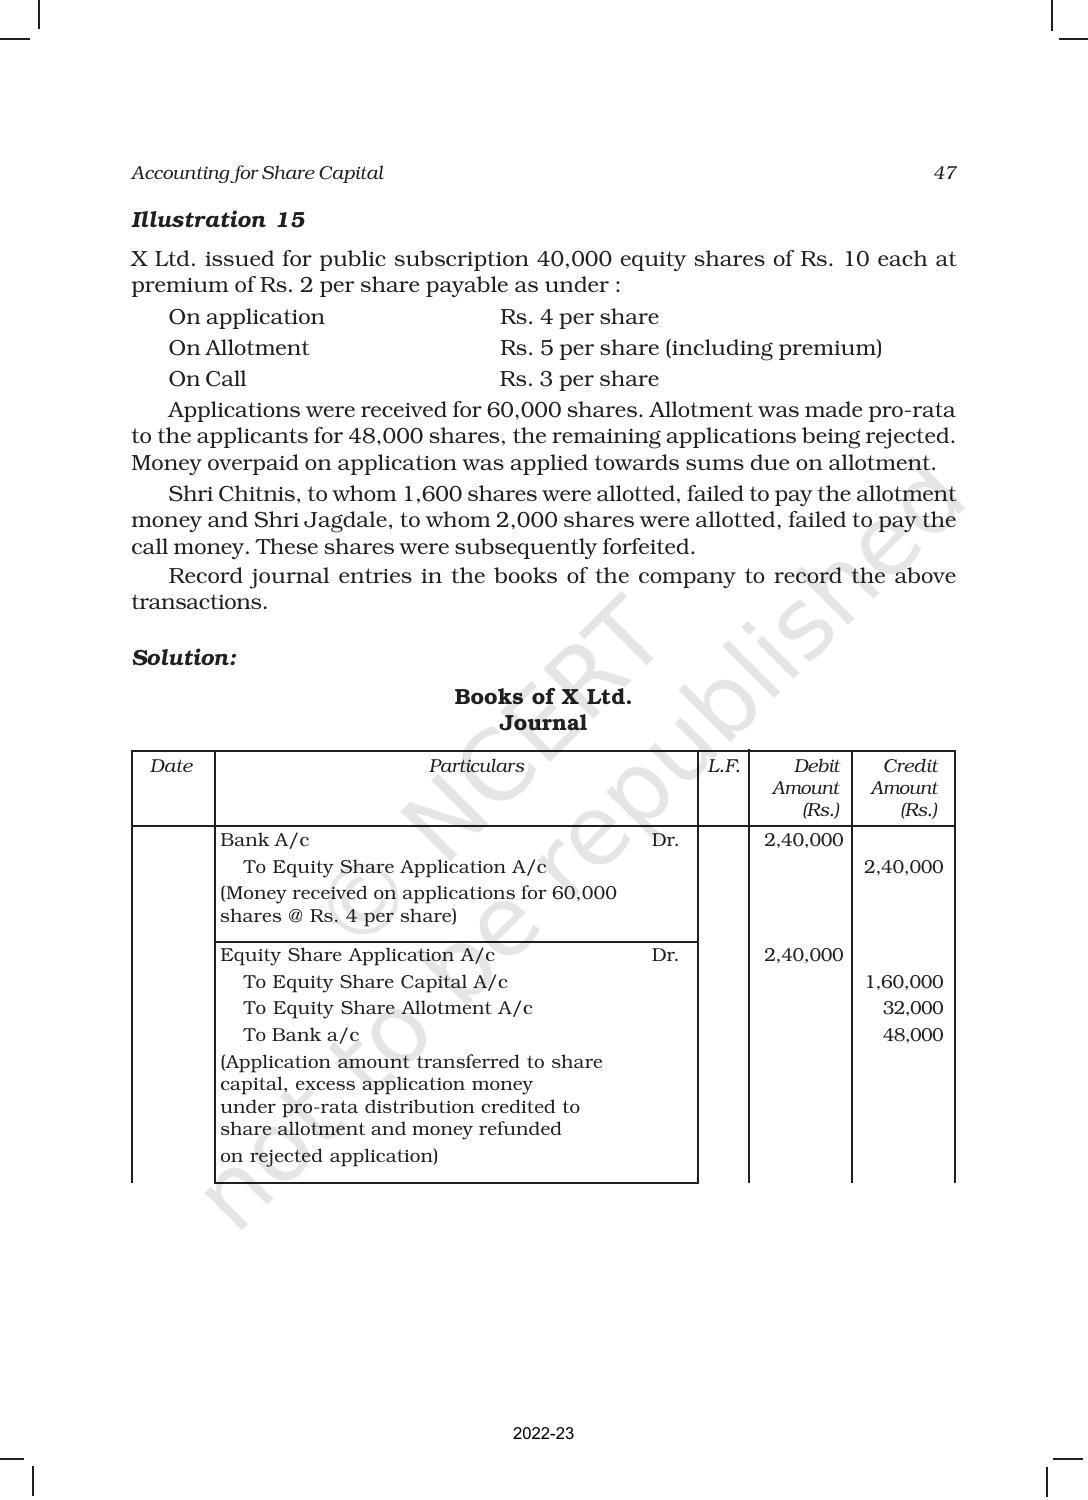 NCERT Book for Class 12 Accountancy Part II Chapter 1 Accounting for Share Capital - Page 47